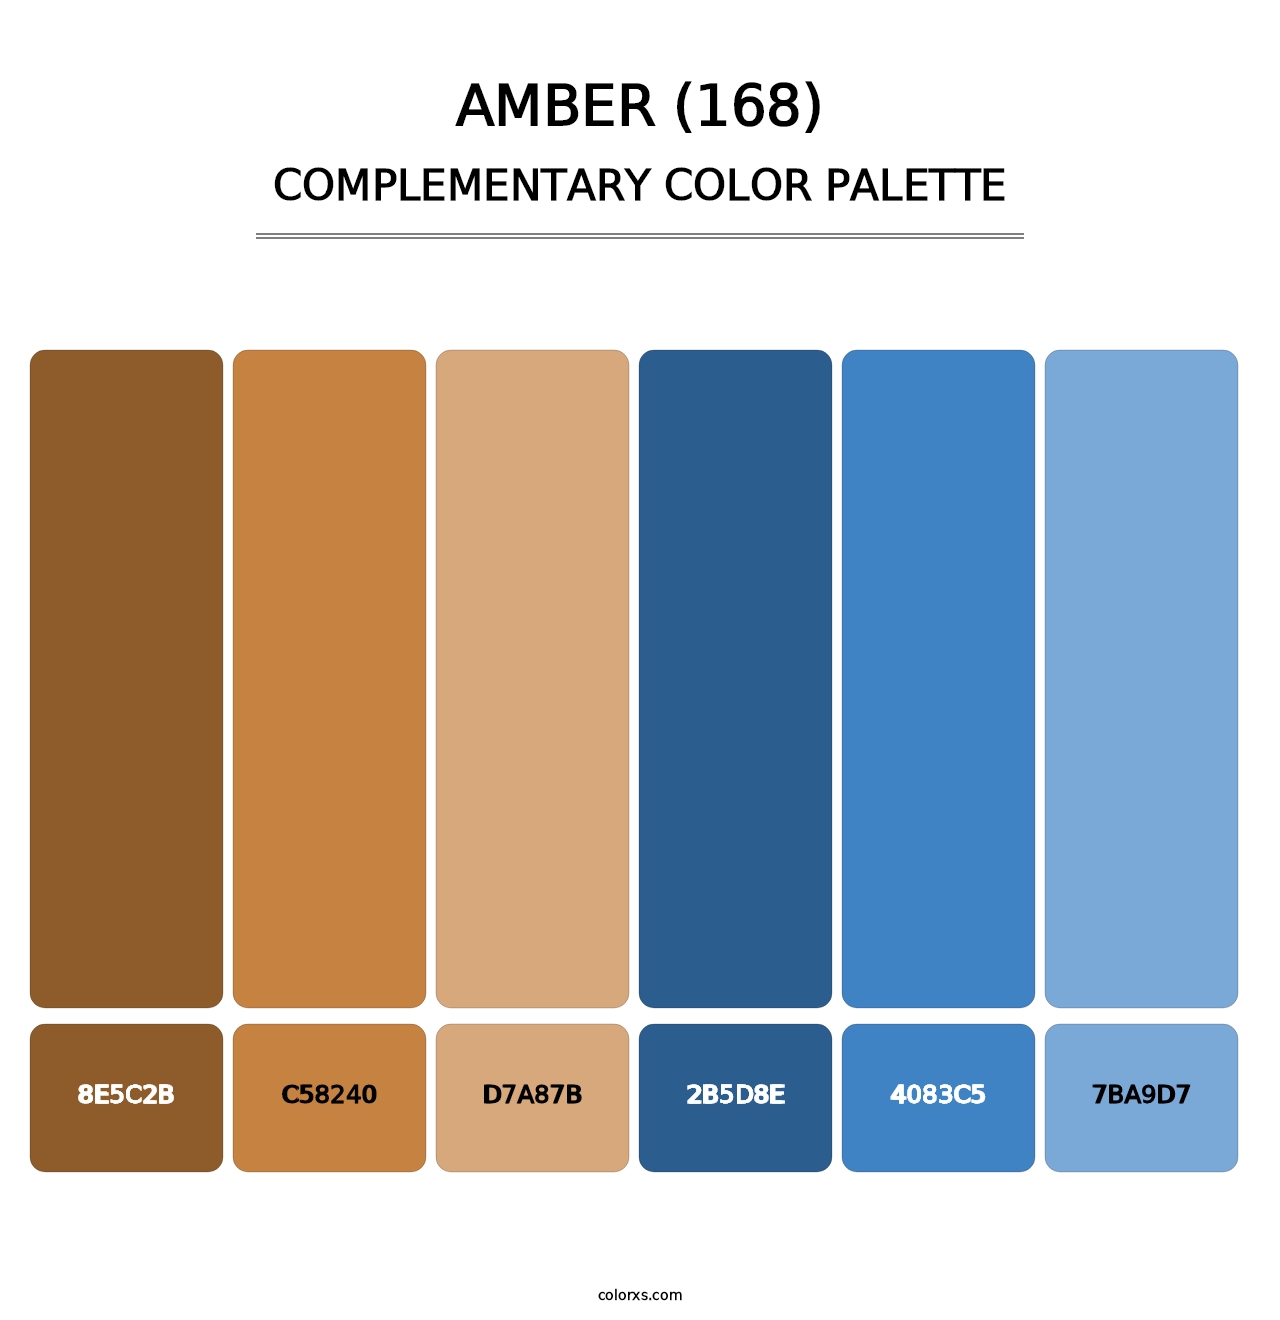 Amber (168) - Complementary Color Palette